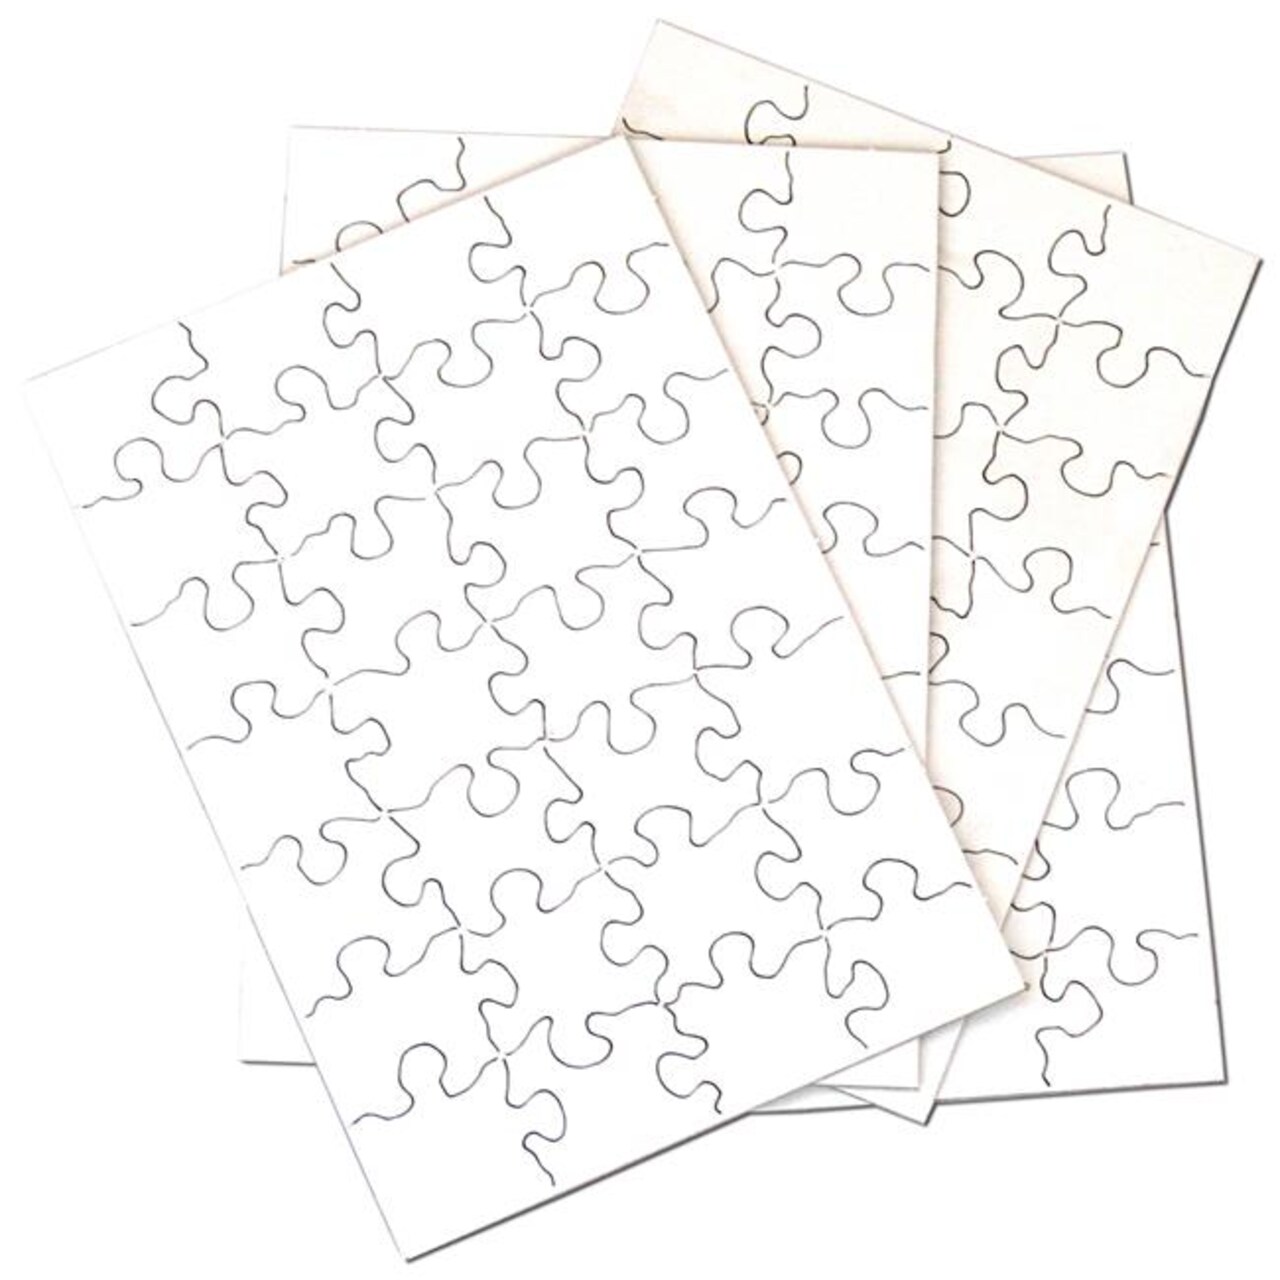 5.5 x 8 in. Puzzle-It Blank Puzzles - 28 Piece - 12 Per Pack